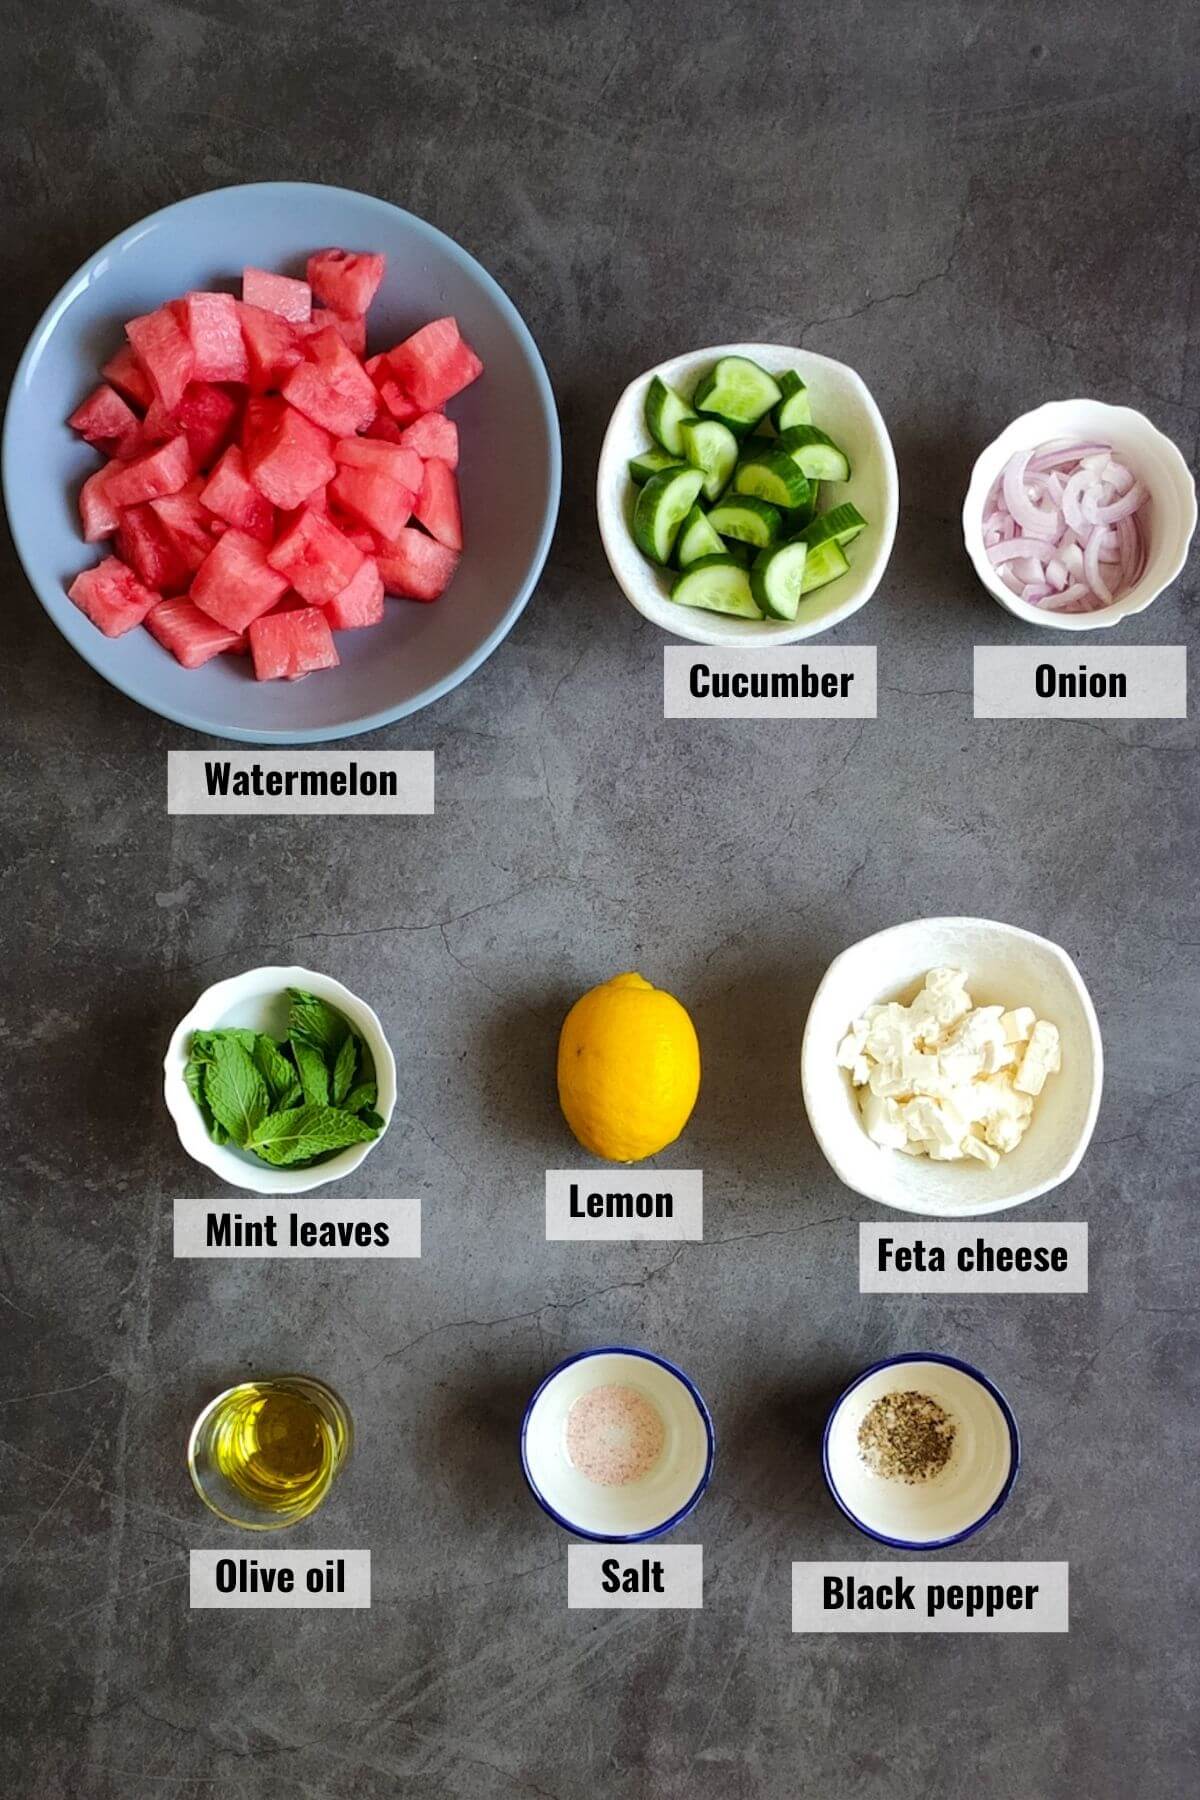 Ingredients for watermelon salad with feta